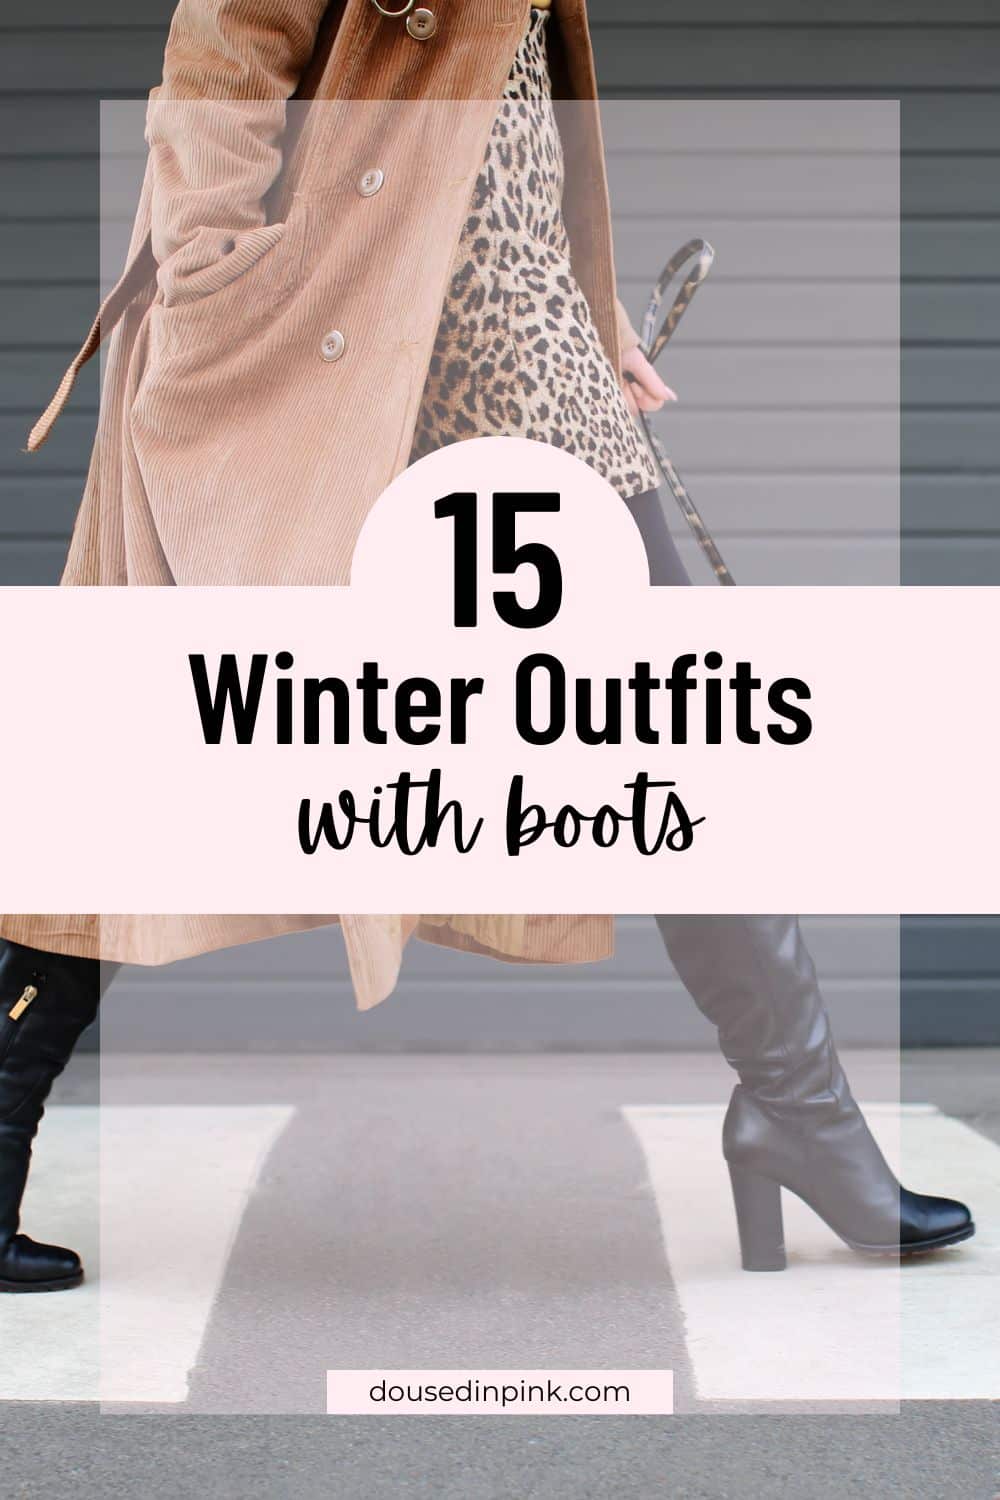 Winter Outfits With Long Boots Online | bellvalefarms.com